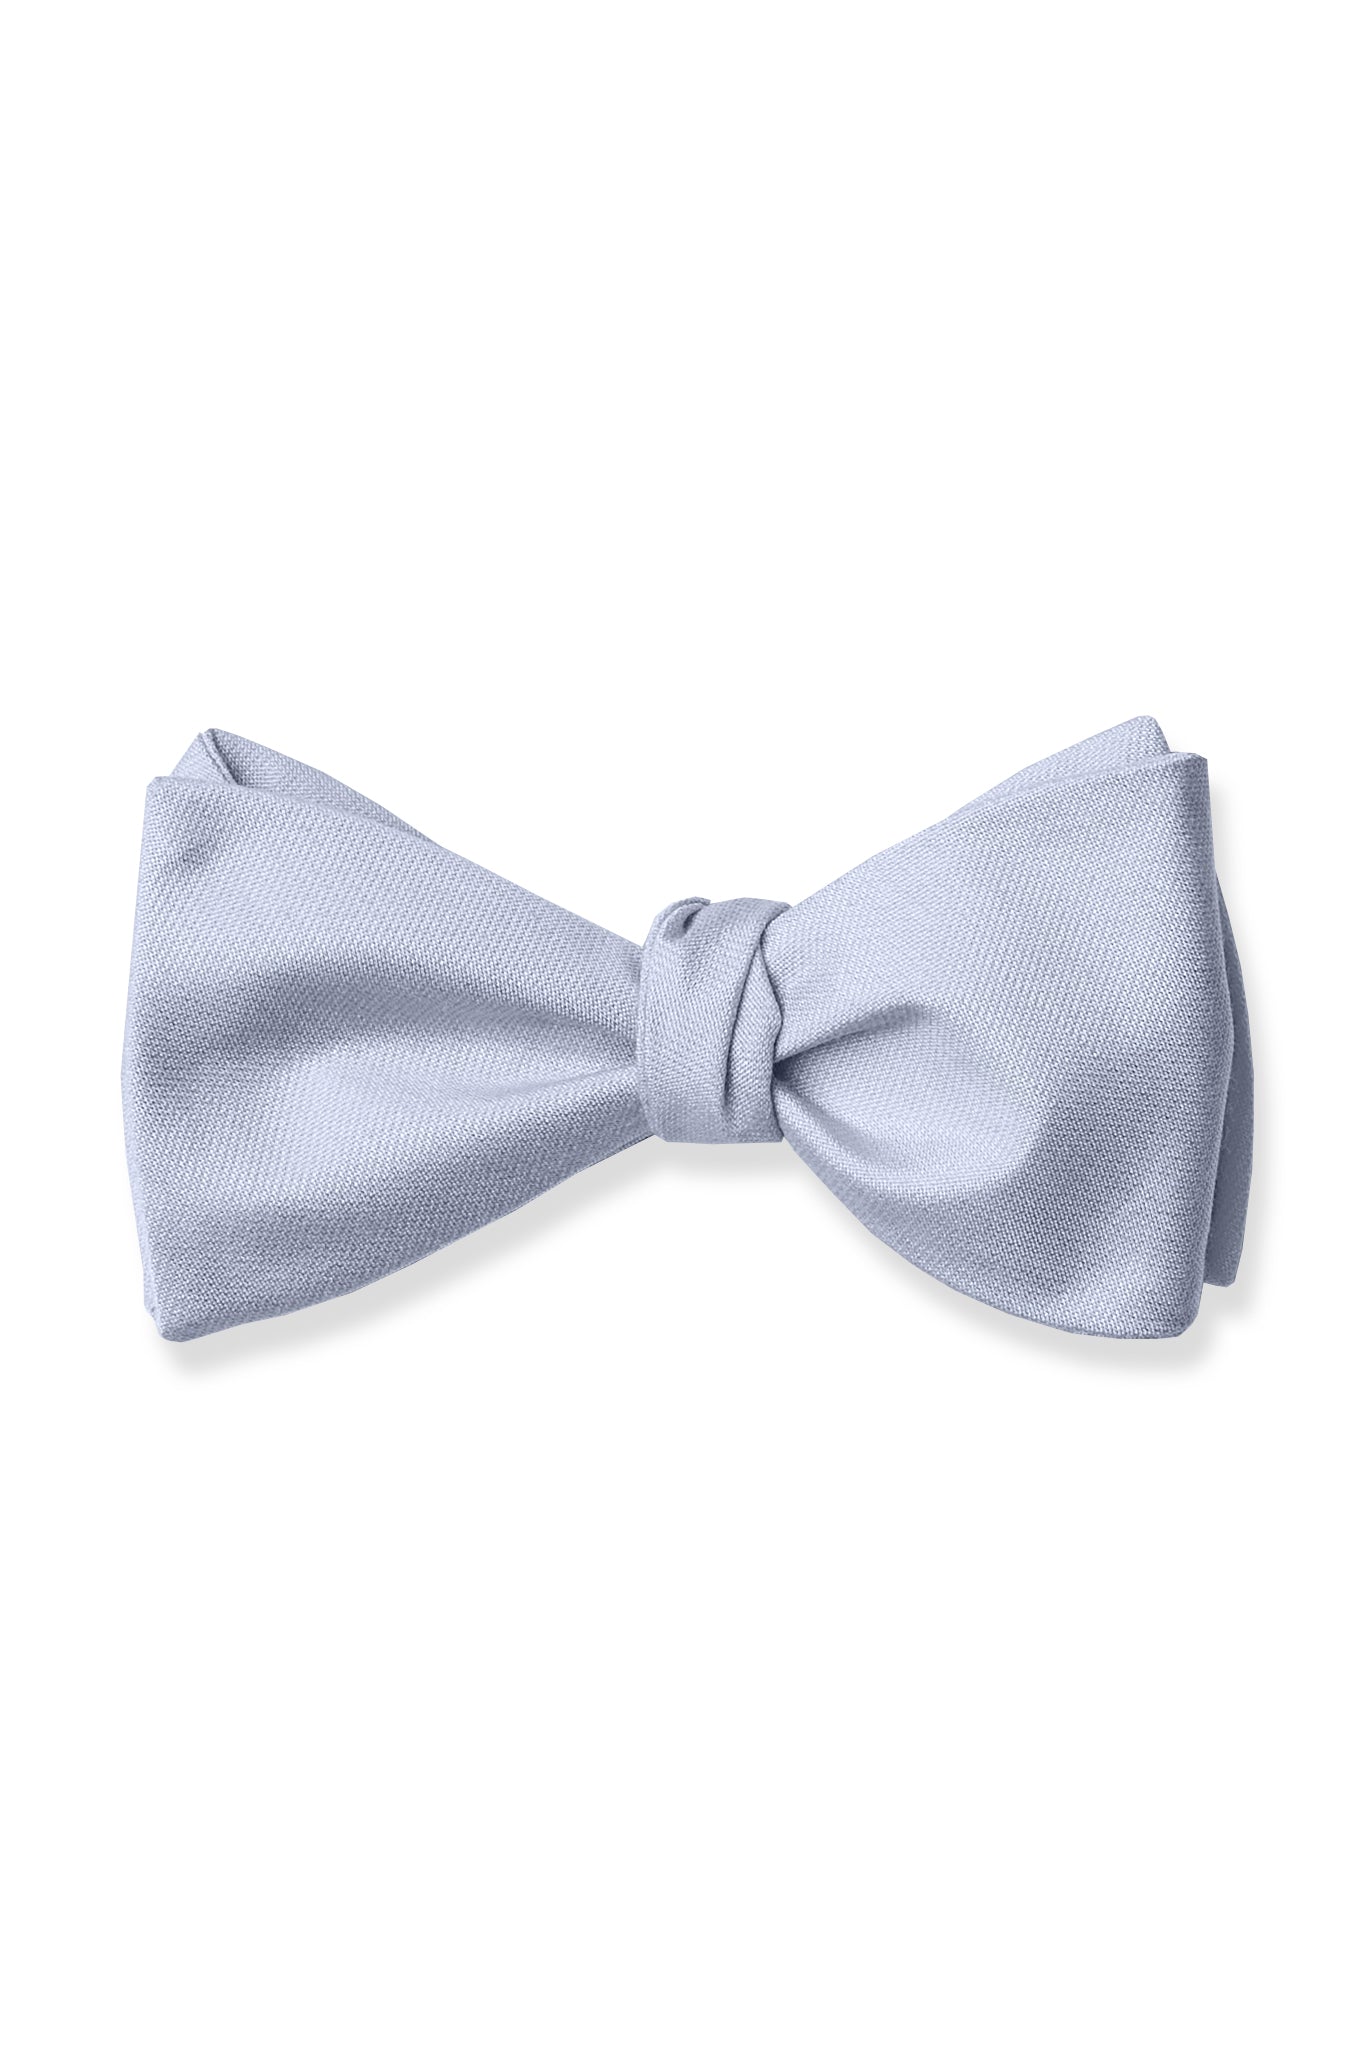 Daniel Bow Tie in ice blue by Birdy Grey, front view